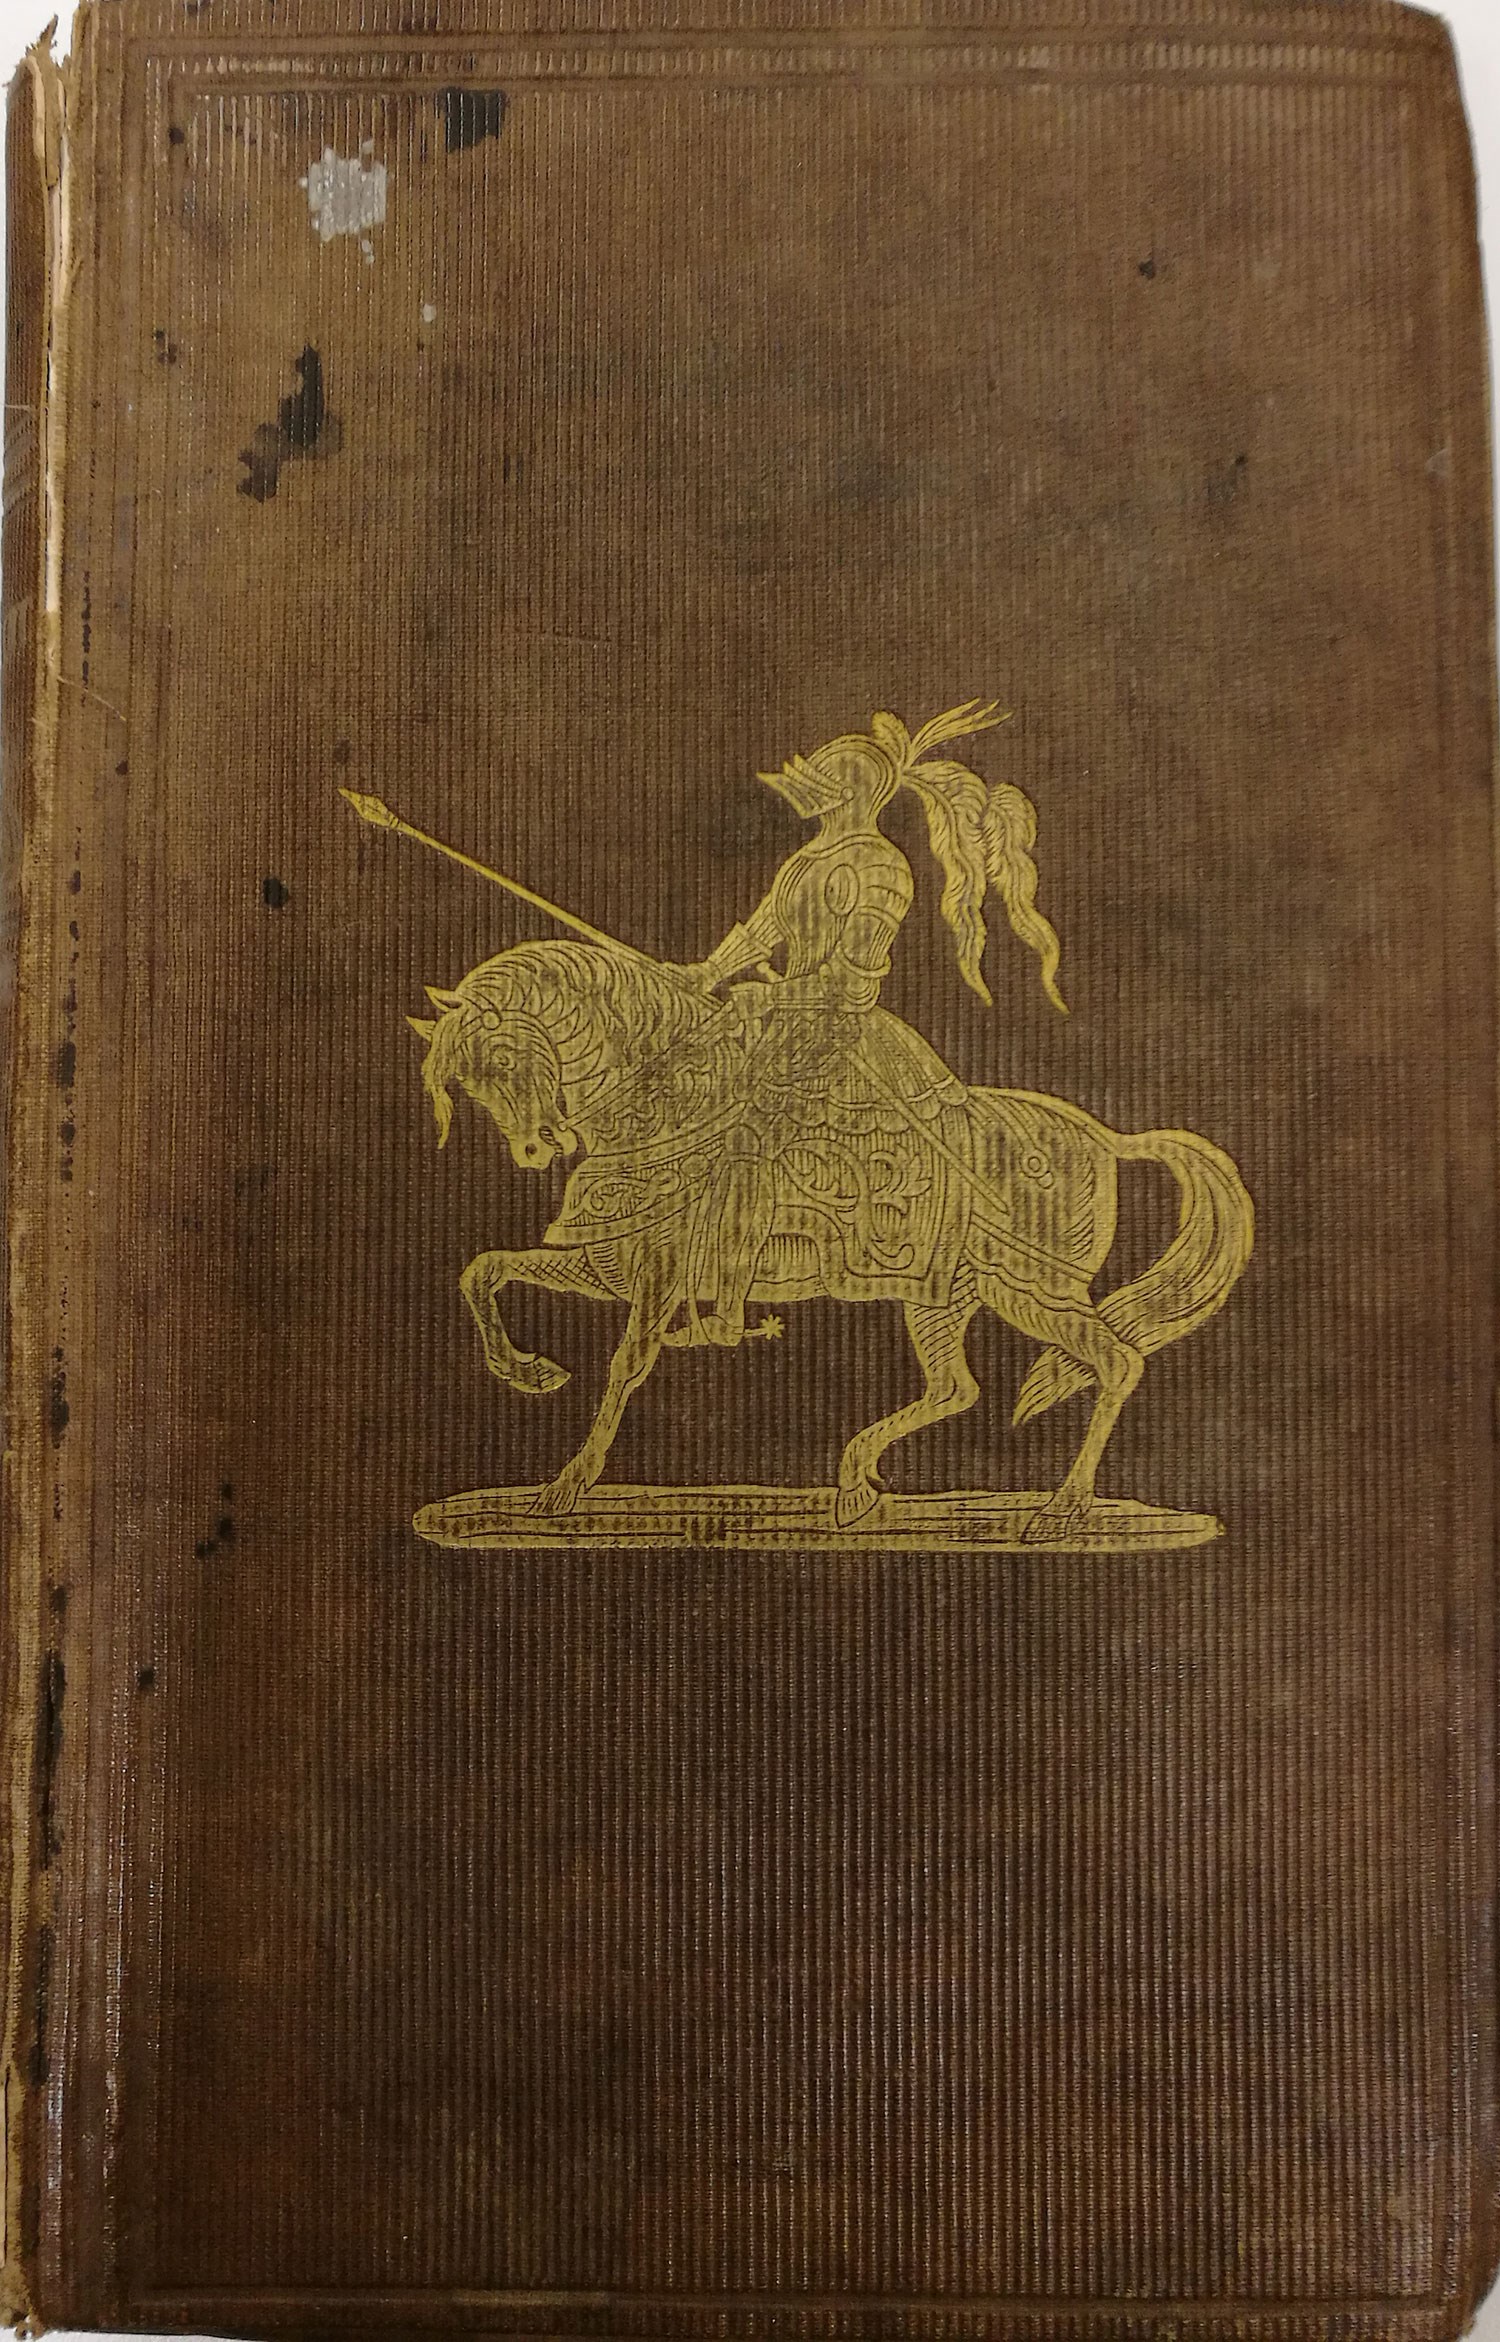 Front cover showing a knight on his horse from Peter Buchan, The Eglinton Tournament and gentleman unmasked (London: Simpkin, Marshall & Co, 1840).